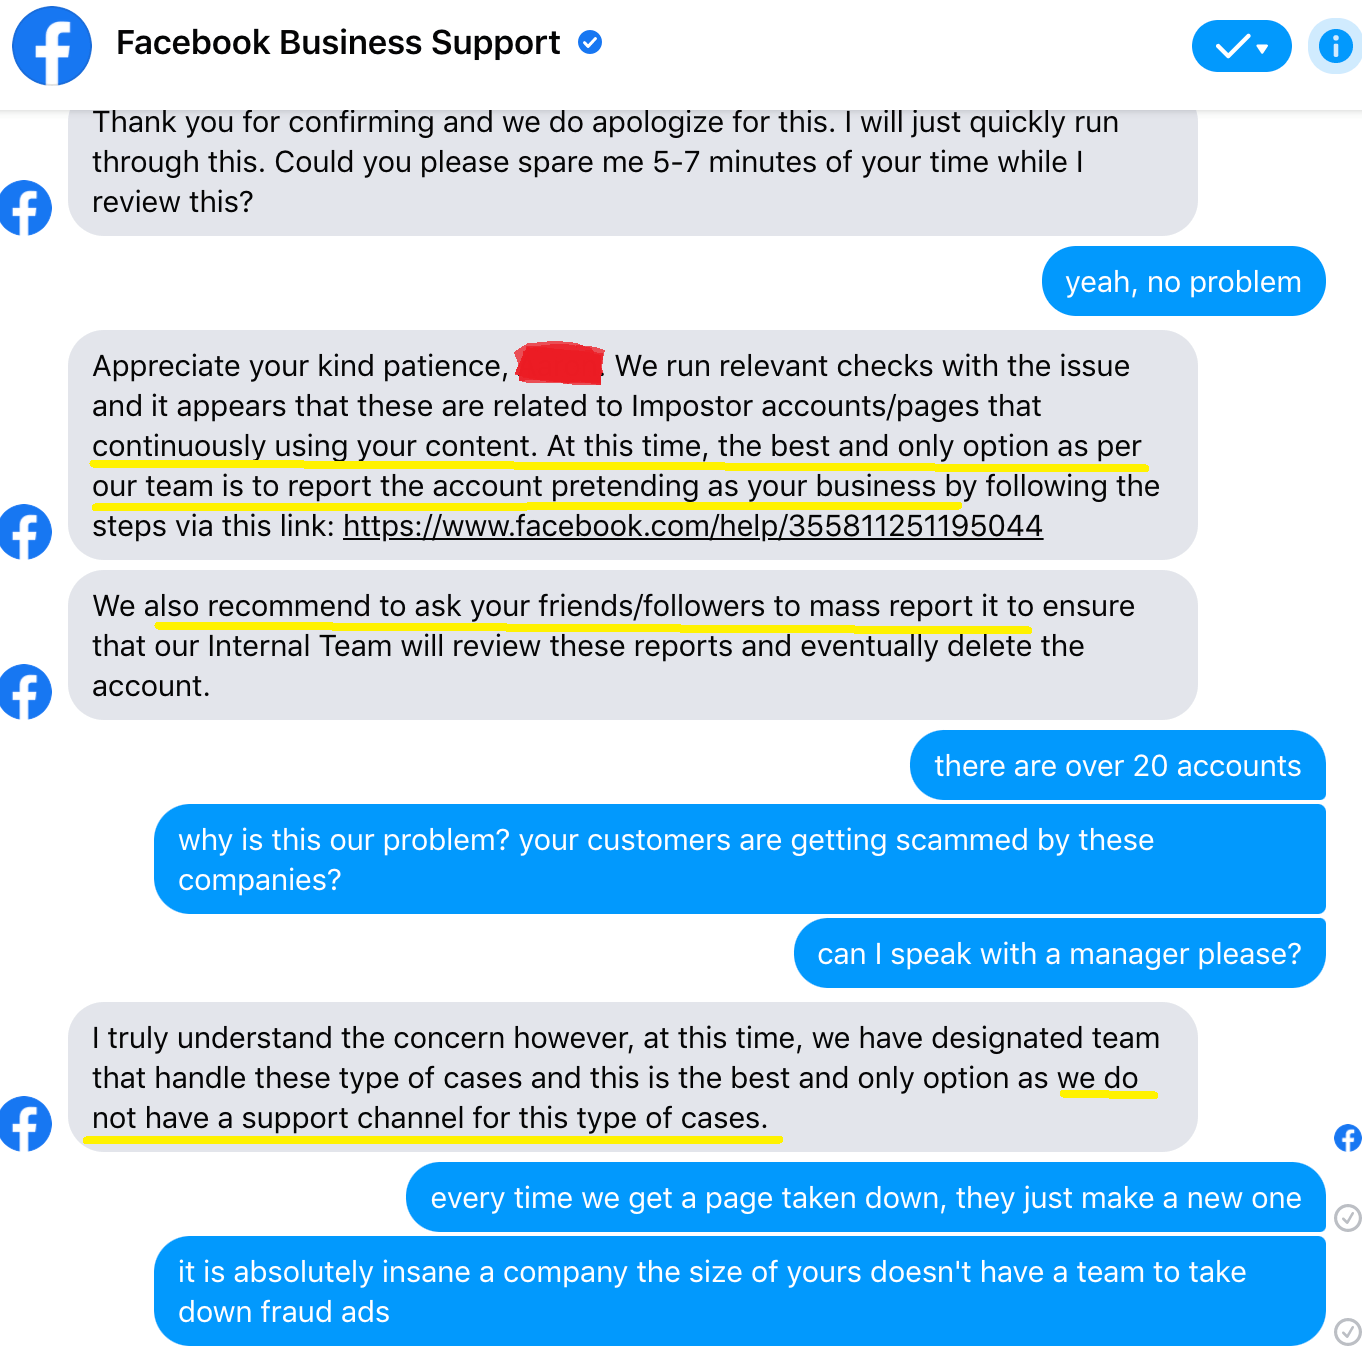 chat with Facebook Business Support about reporting imposter pages